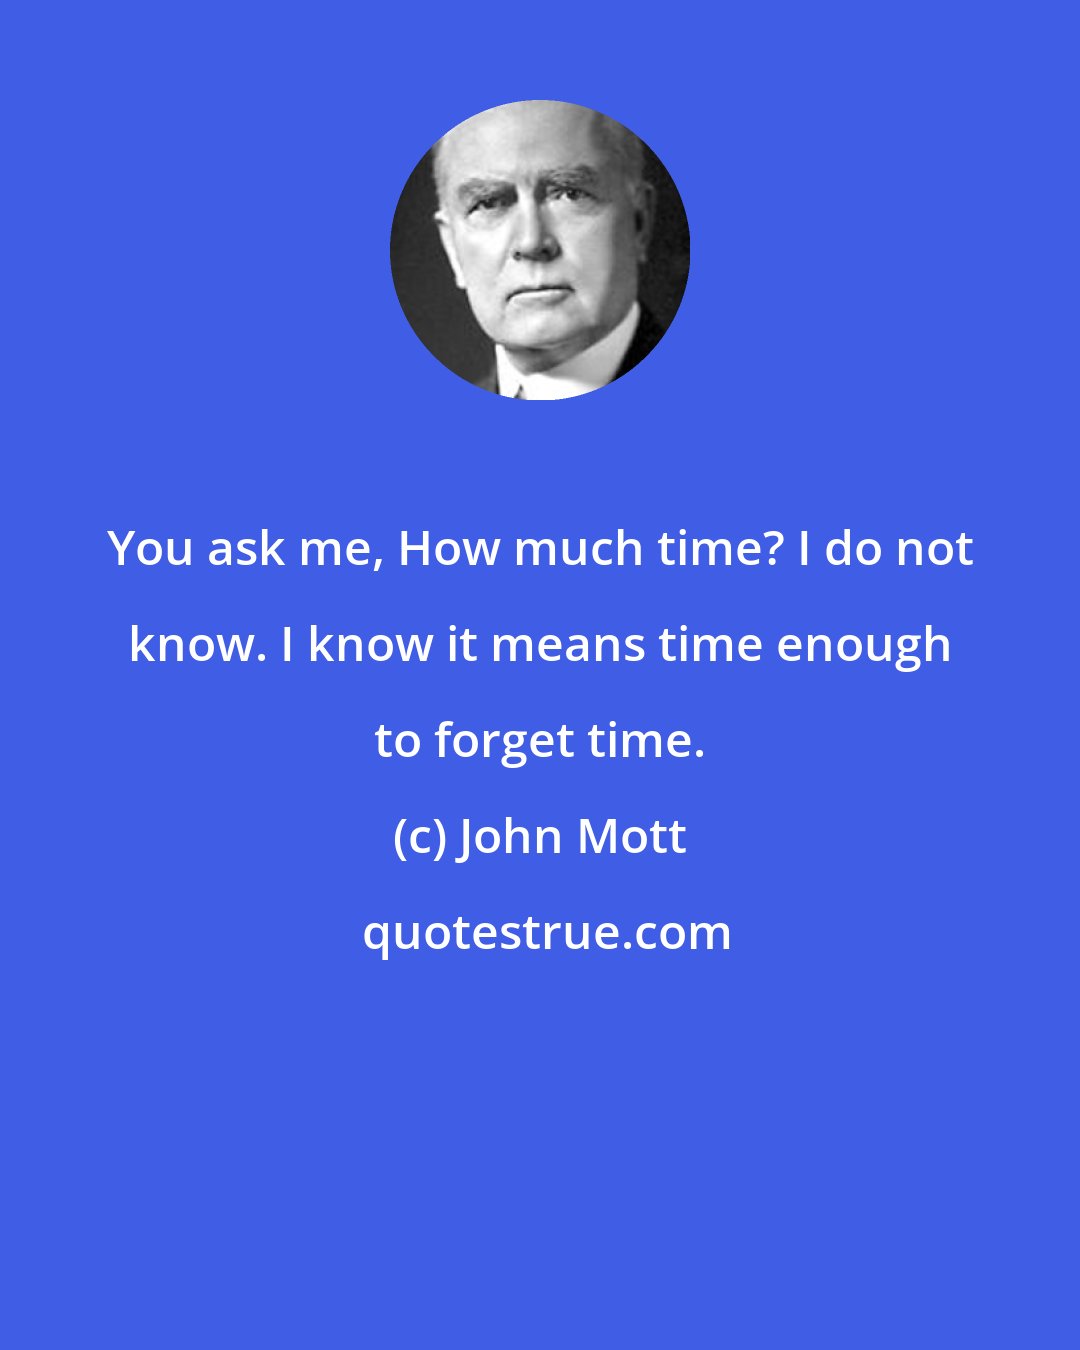 John Mott: You ask me, How much time? I do not know. I know it means time enough to forget time.